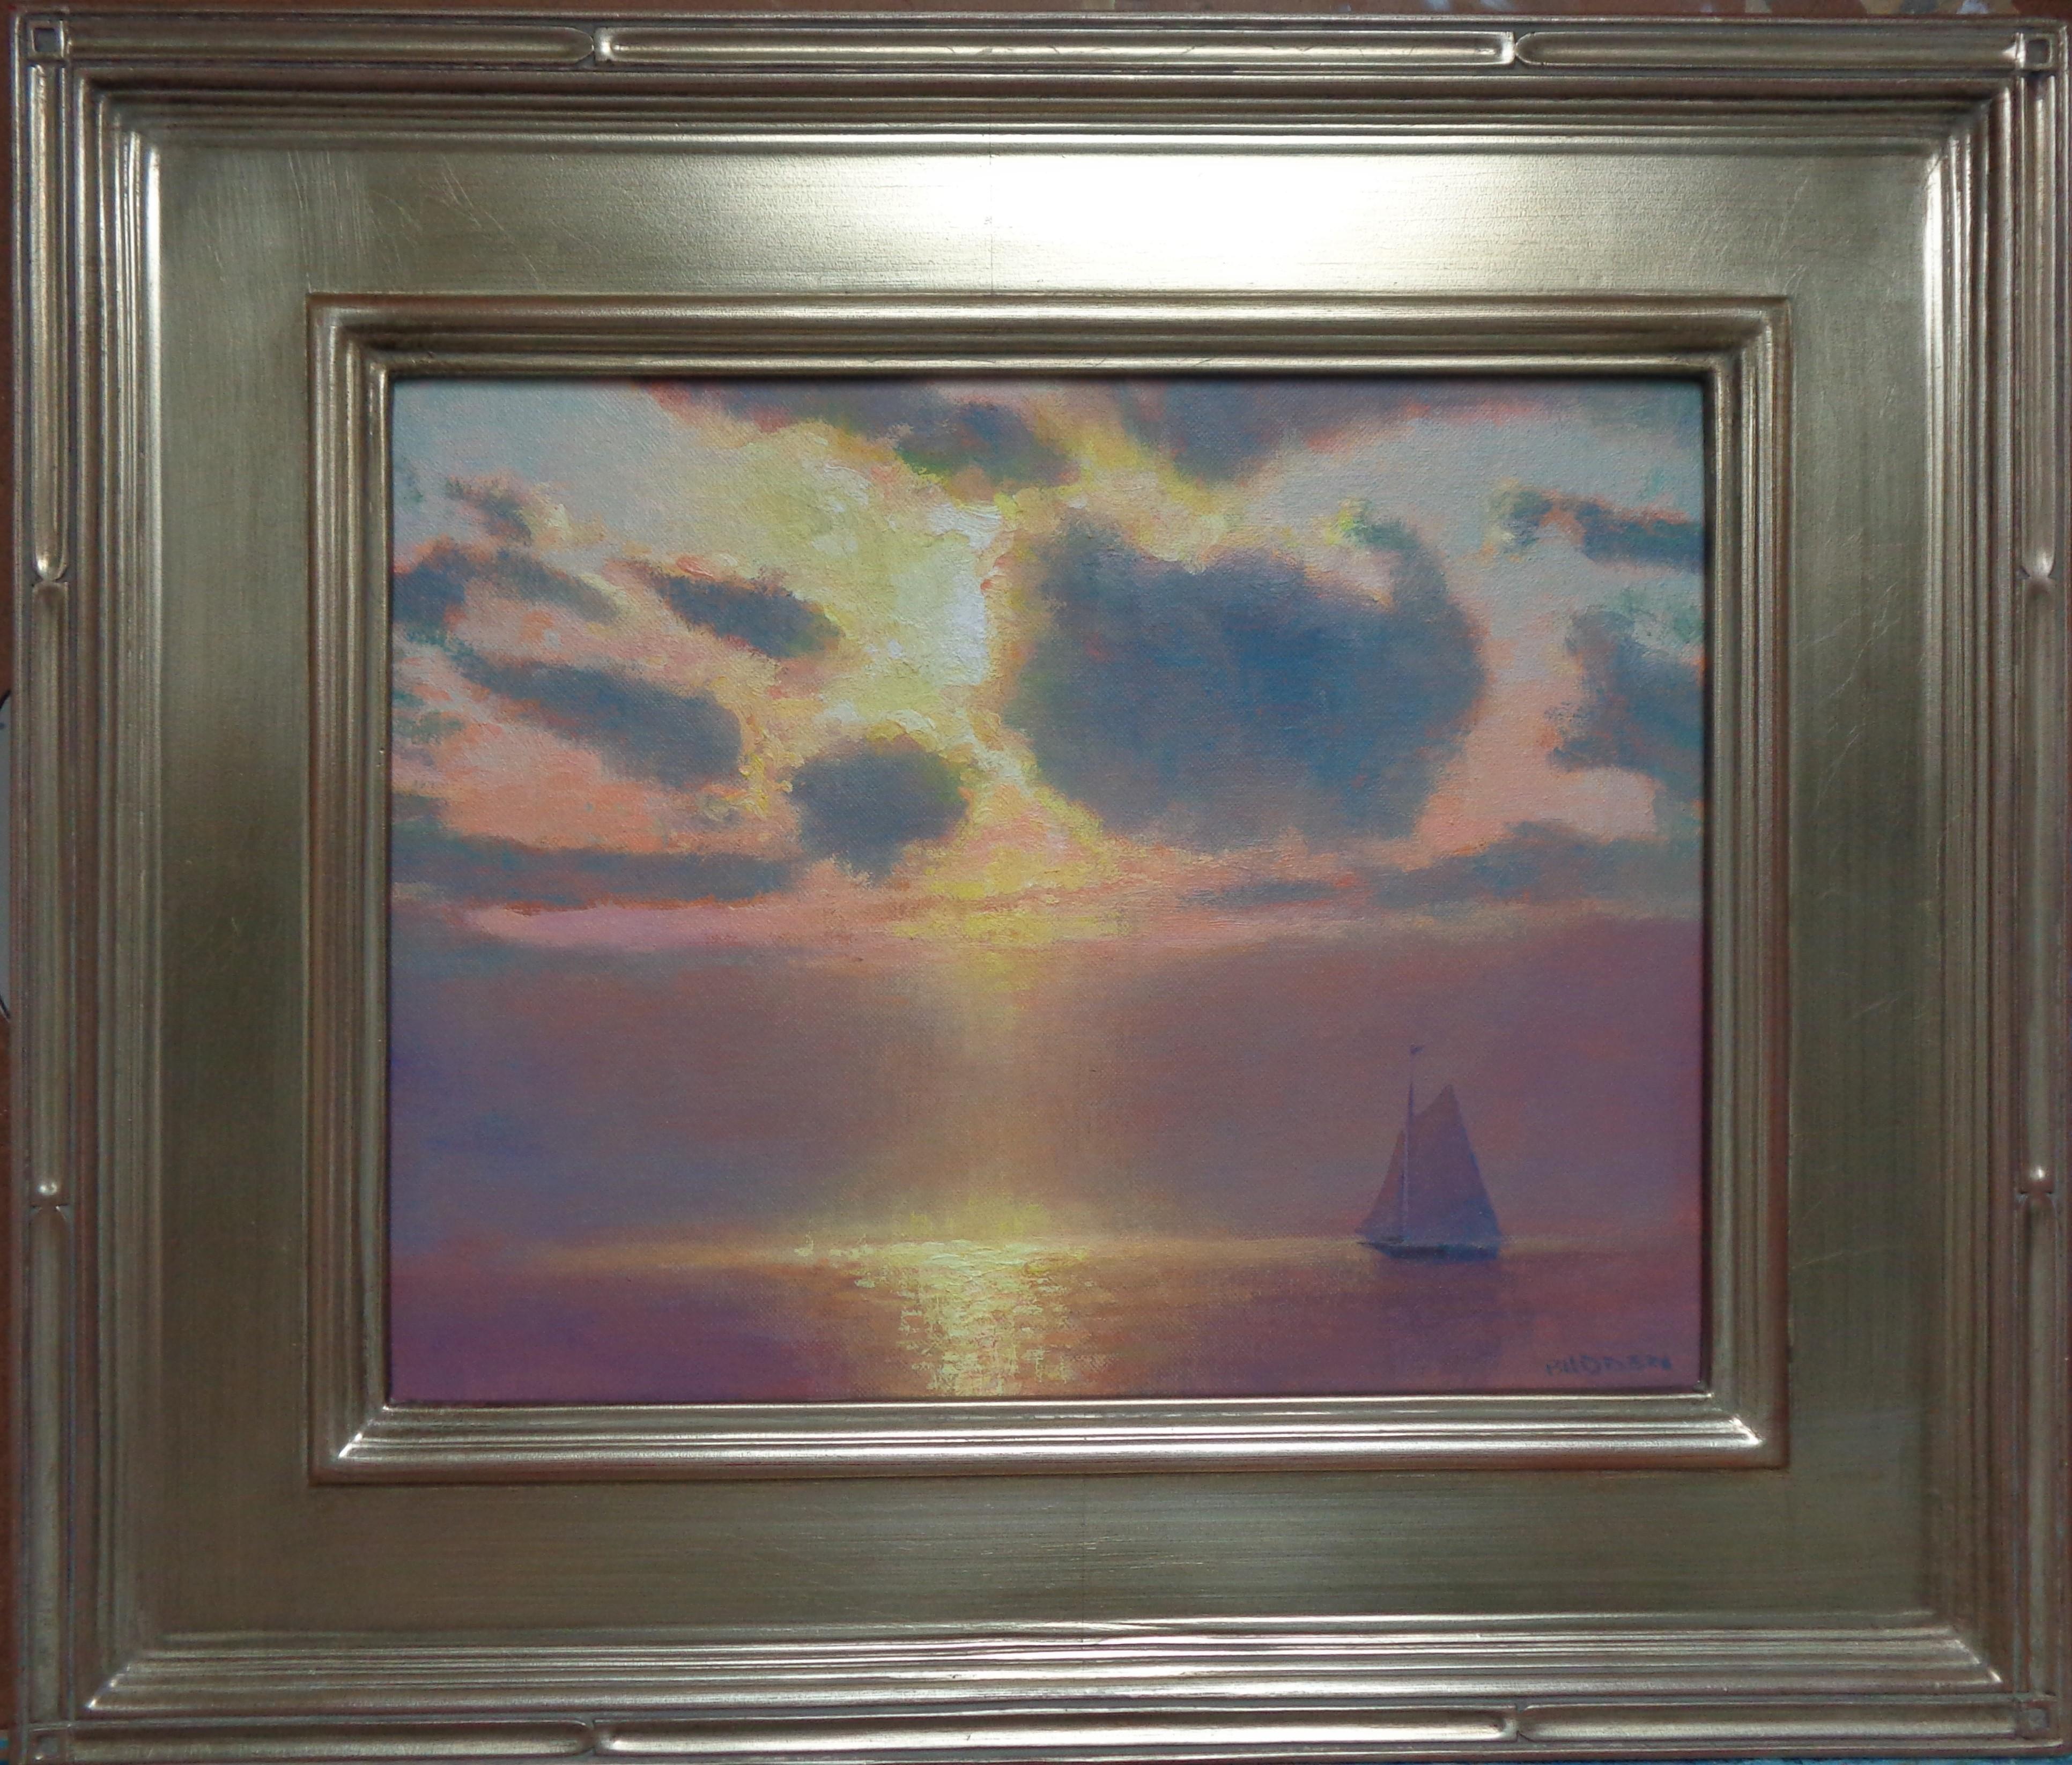 Mystical Voyage
oil/panel 11 x 14 image
Mystical Voyage is an oil painting on canvas panel by award winning contemporary artist Michael Budden that showcases a uniquely beautiful seascape with the reflection of the incredible quality of light in the